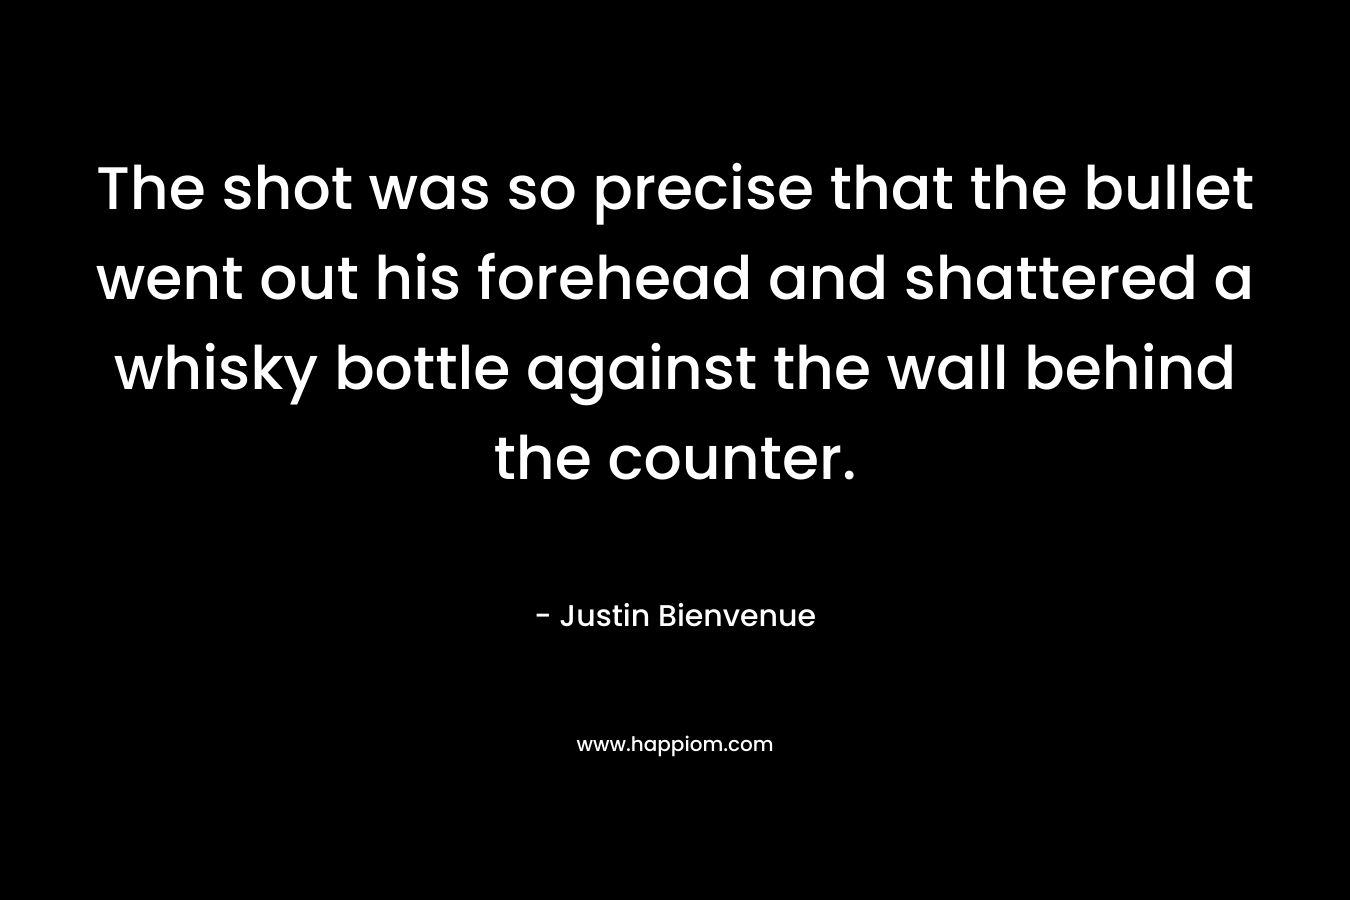 The shot was so precise that the bullet went out his forehead and shattered a whisky bottle against the wall behind the counter. – Justin Bienvenue